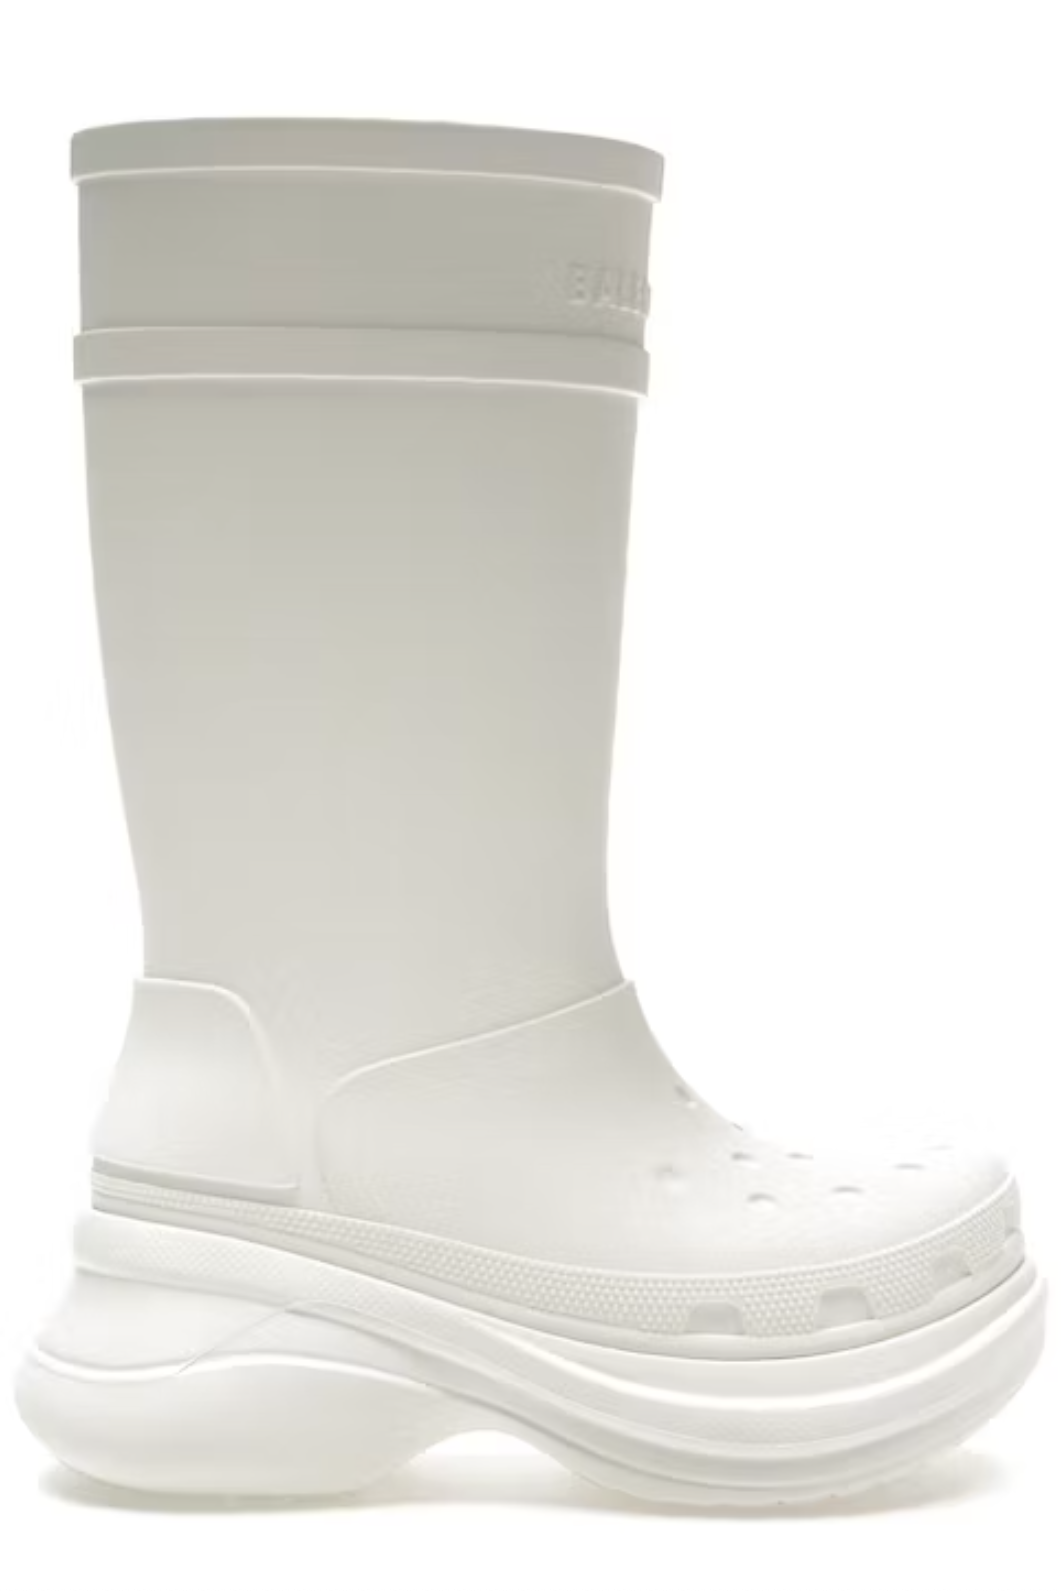 Balenciaga X Crocs Logo Debossed Boots (UA) - UK 6 - CLEARANCE SALE 40% 0FF - SHIPS TO THE UK ONLY